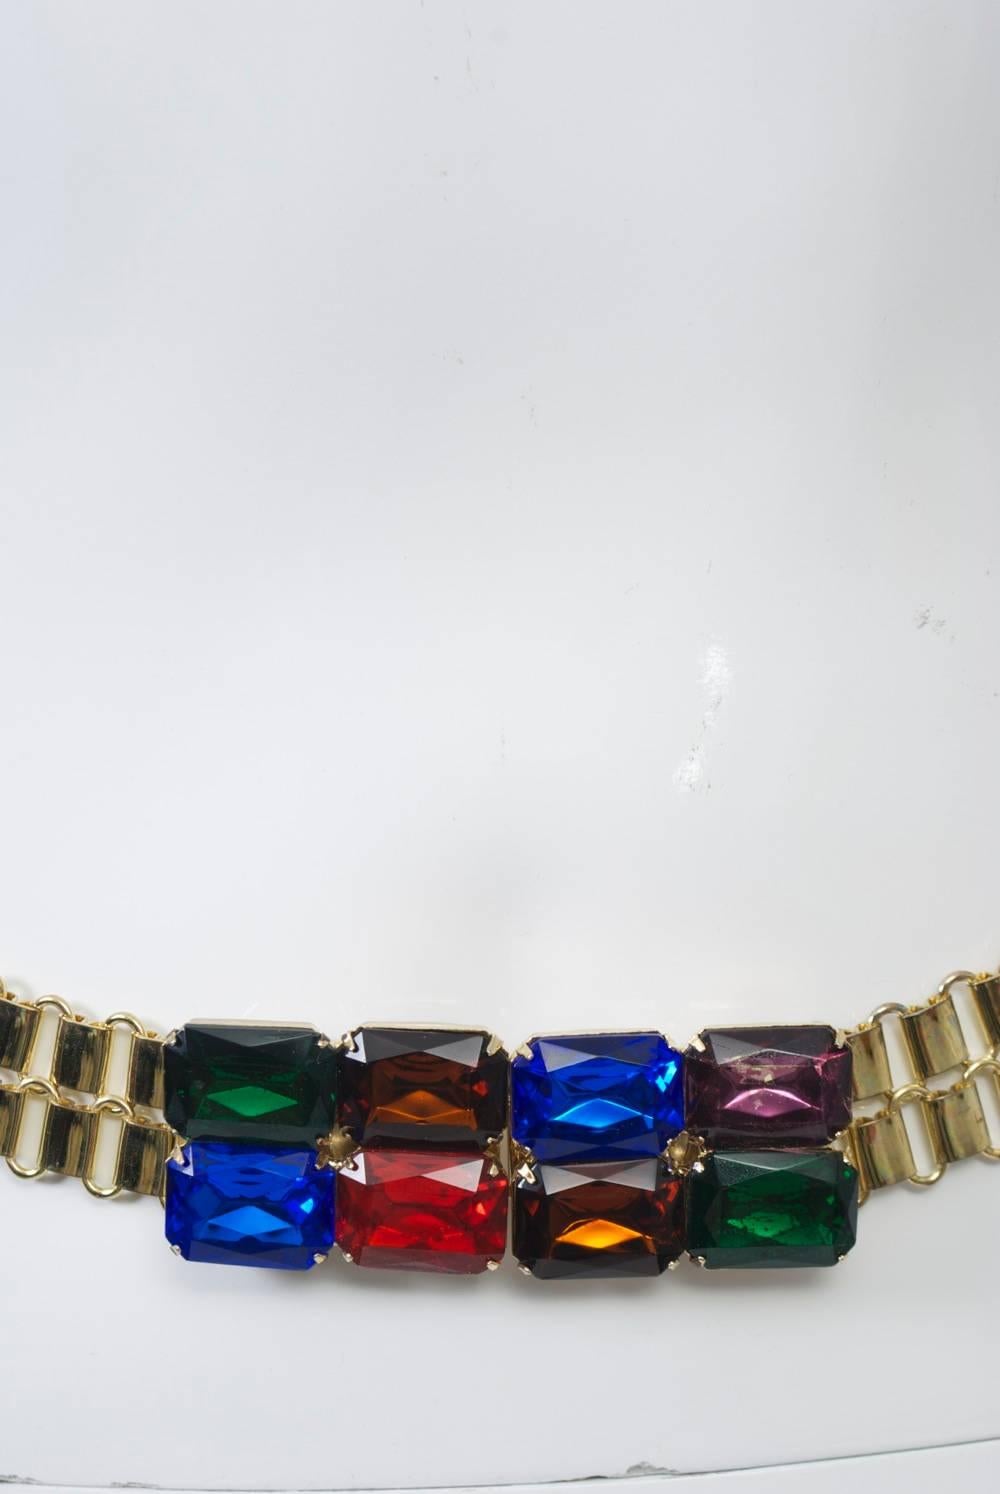 Link Belt with Multi-Stone Clasp In Excellent Condition For Sale In Alford, MA